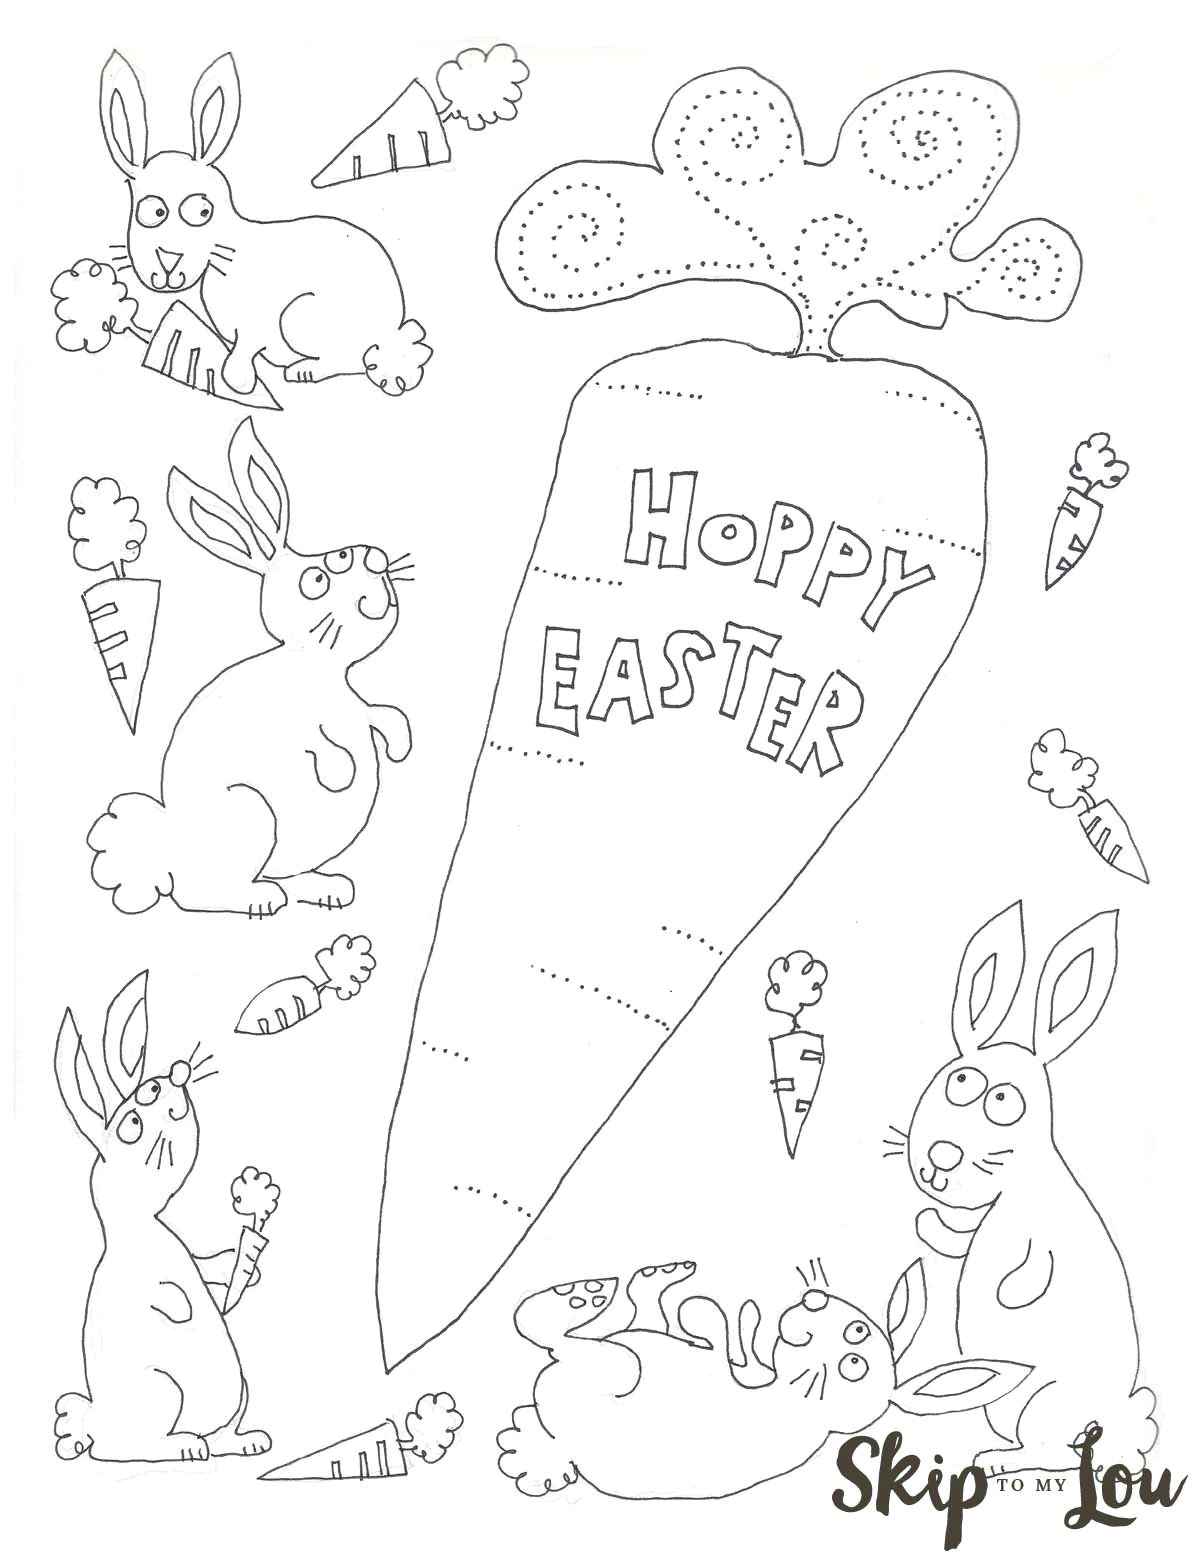 Drawings Of Easter Flowers Bunnies Coloring Page for Easter Free Printable Easter and Bunny